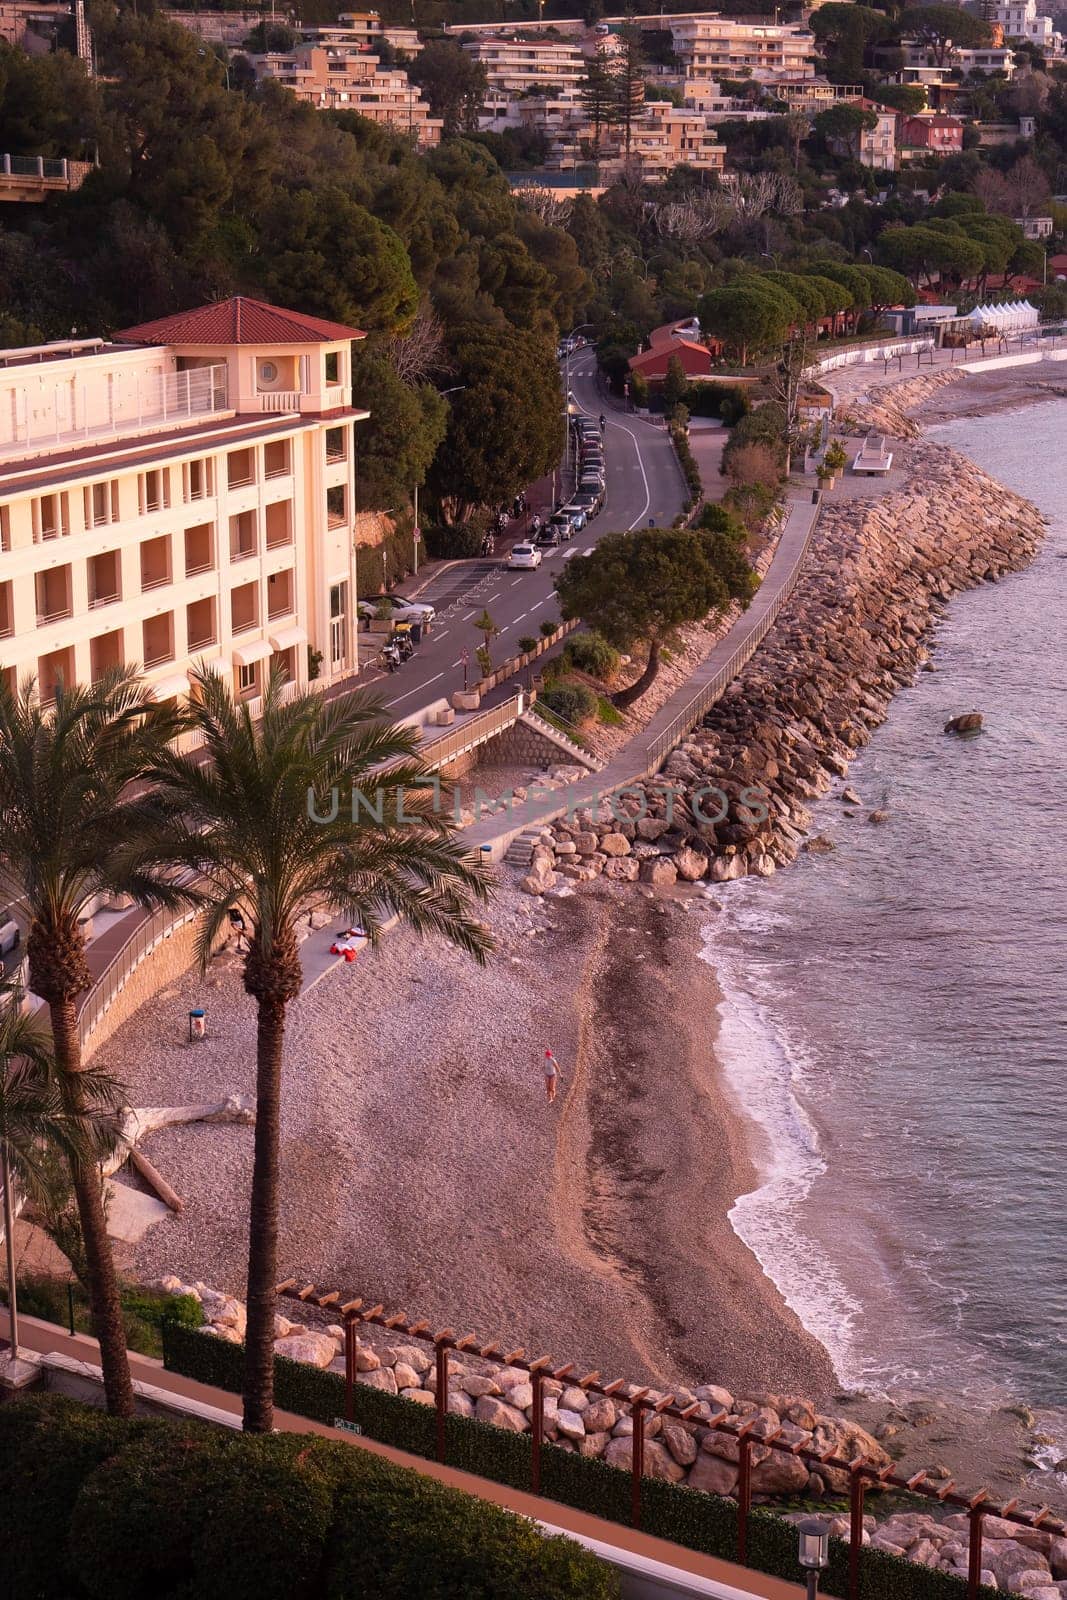 Monte Carlo, Monaco is a country on the French Riviera near France in Europe, Hight quality photo